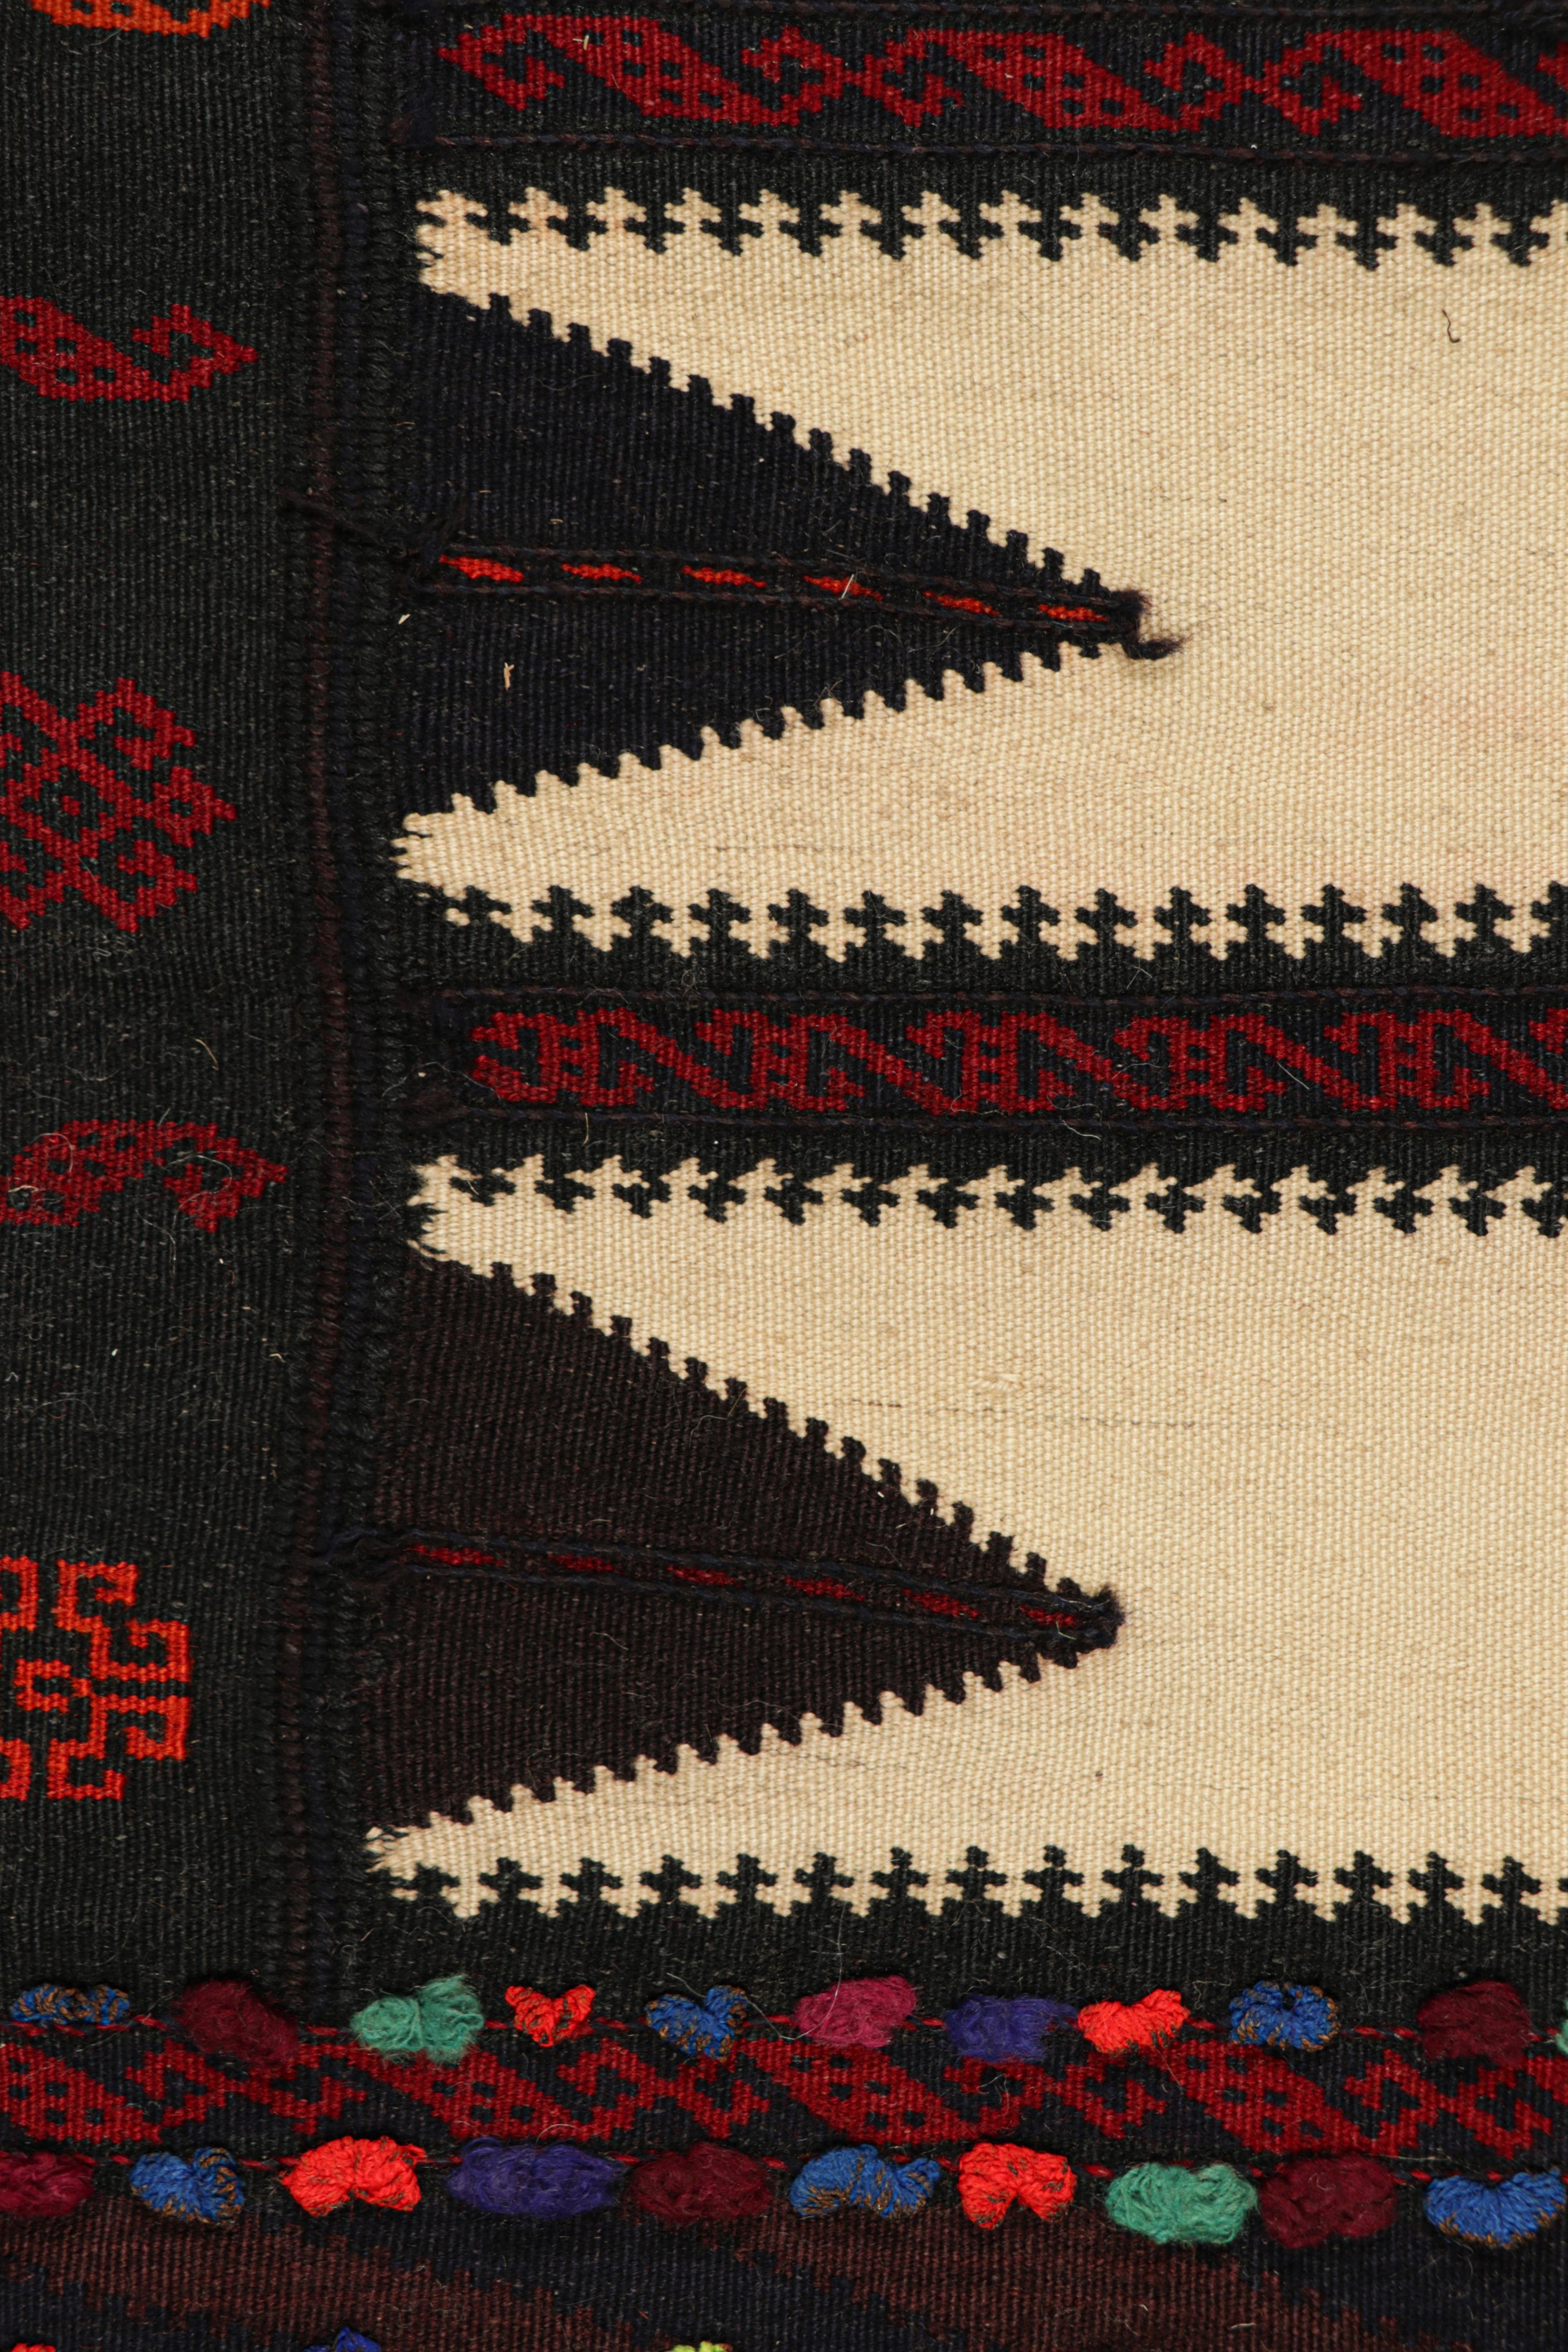 Handwoven in wool, circa 1950-1960, this 2×4 vintage Afghan tribal kilim, is a collectible tribal piece that may have been used as table covers in nomadic daily life, much similar to Persian Sofreh Kilims.

On the Design: 

Drawing on Afghan tribal